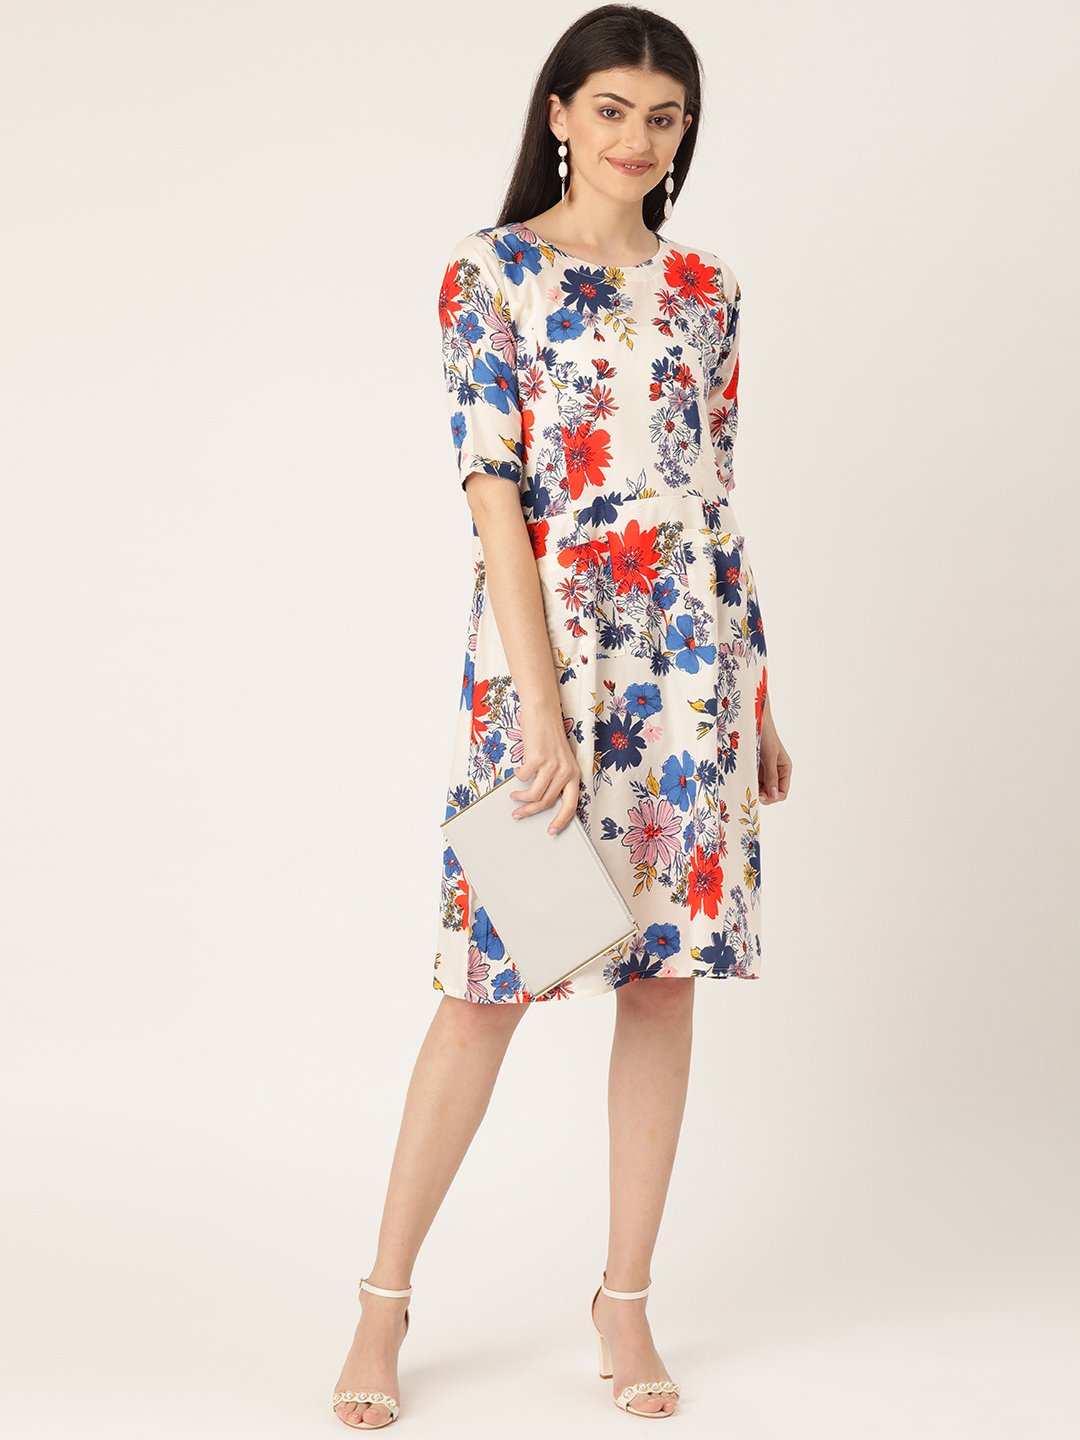 Floral Printed Dress With Pockets